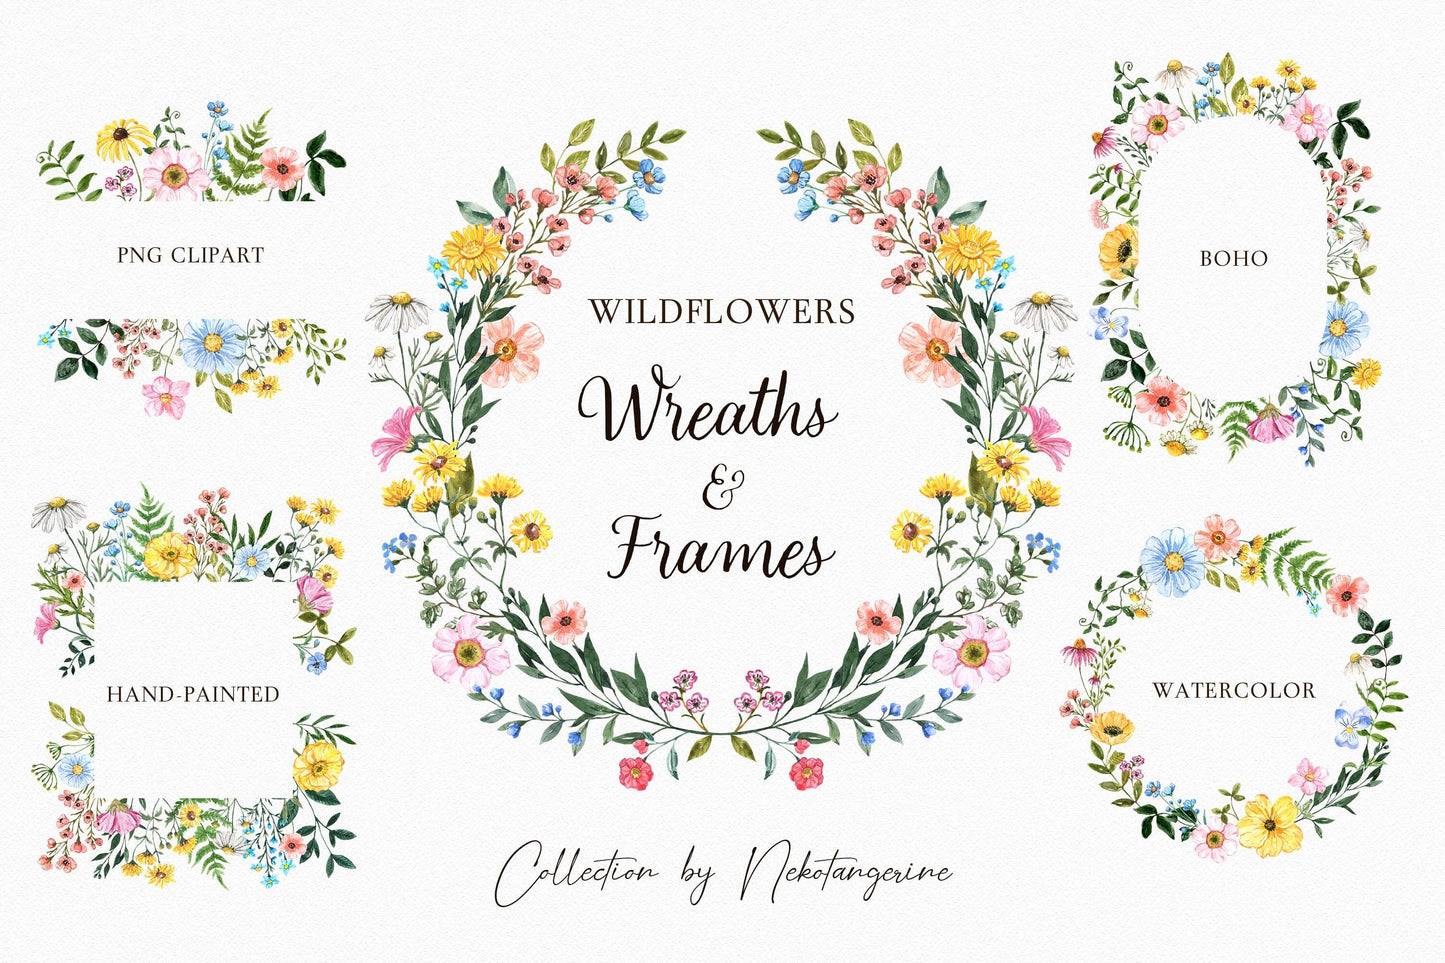 Watercolor Boho Wildflowers Frames and Wreaths clipart, watercolor wildflower clipart, floral frame PNG clip art by Anna Kuzmina